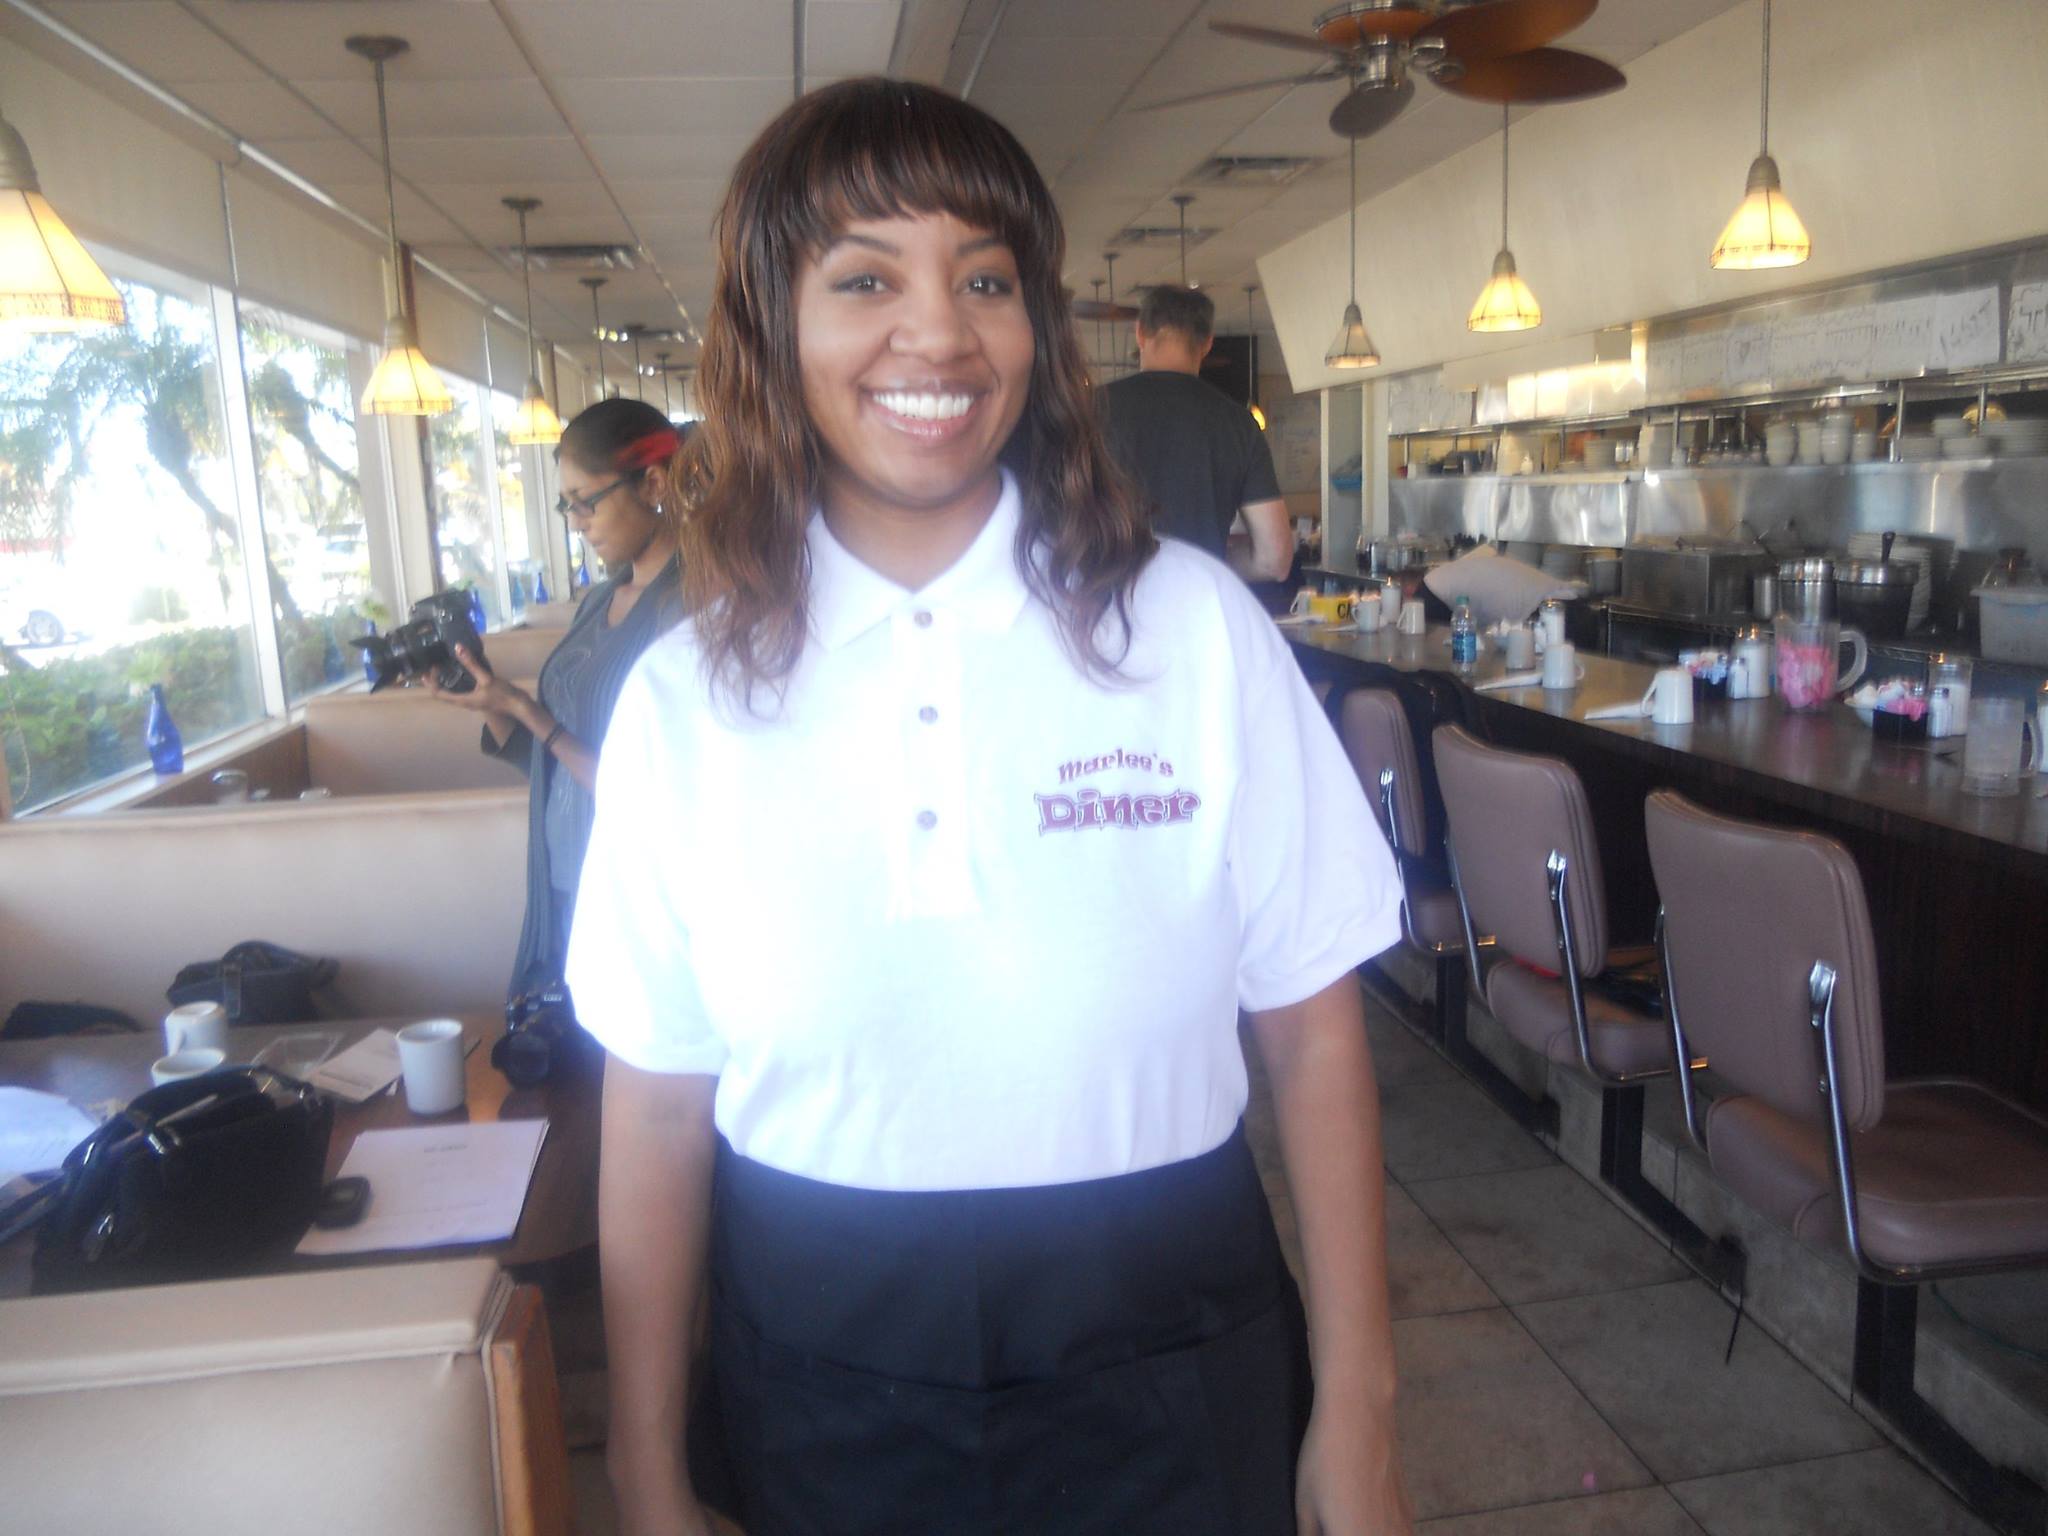 Here's Nicole on set of TV Pilot playing role of a sassy waitress. Filmed in Florida.